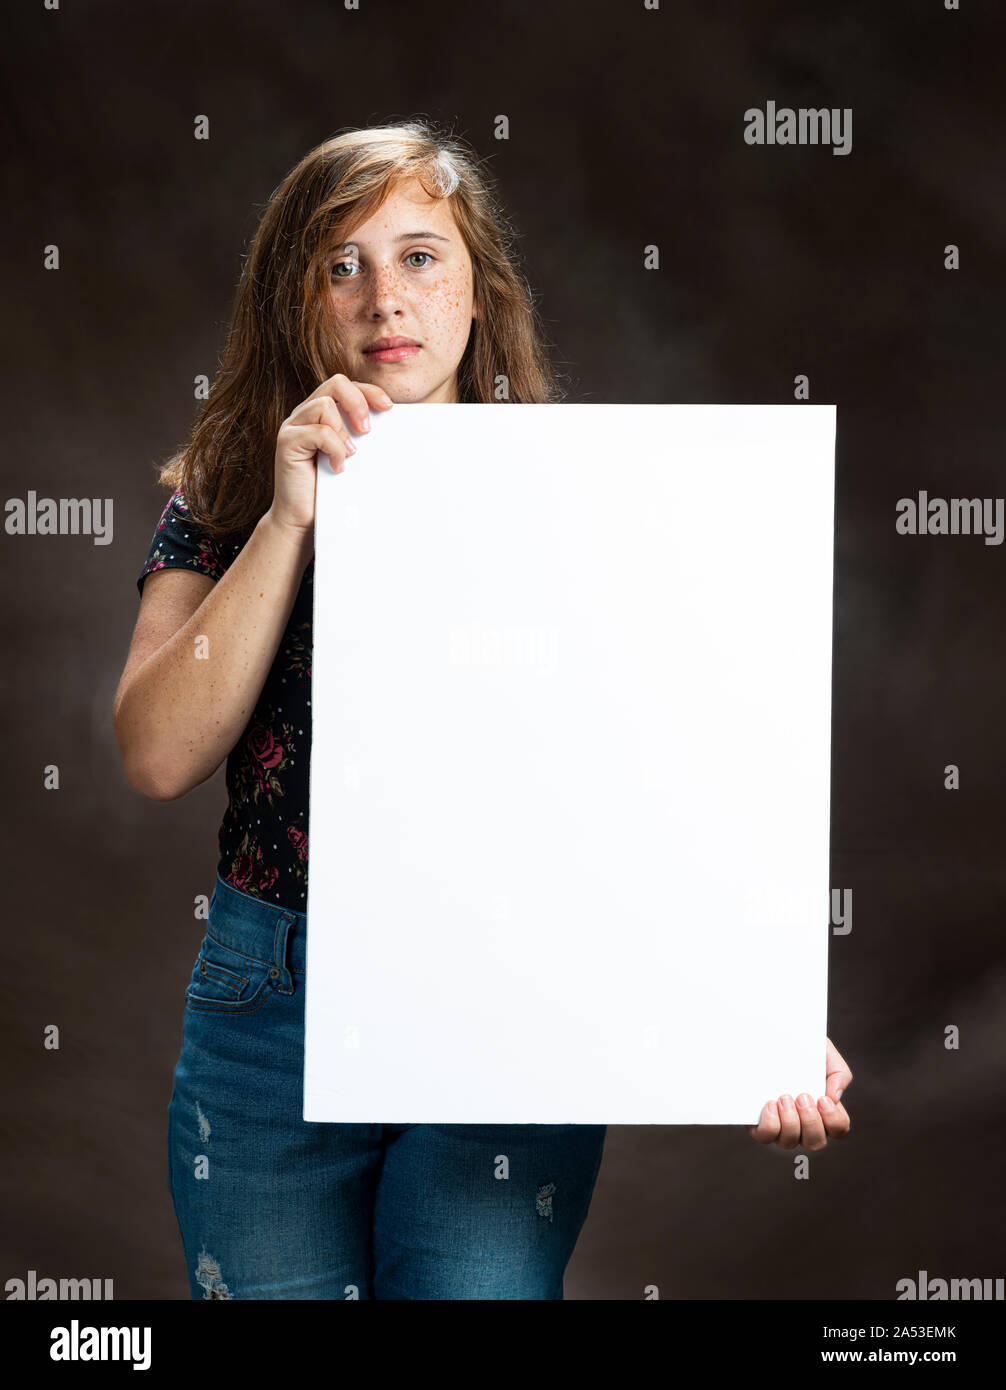 Vertical studio shot of a serious looking pre-teen girl holding a blank vertical white sign.  Brown background. Stock Photo